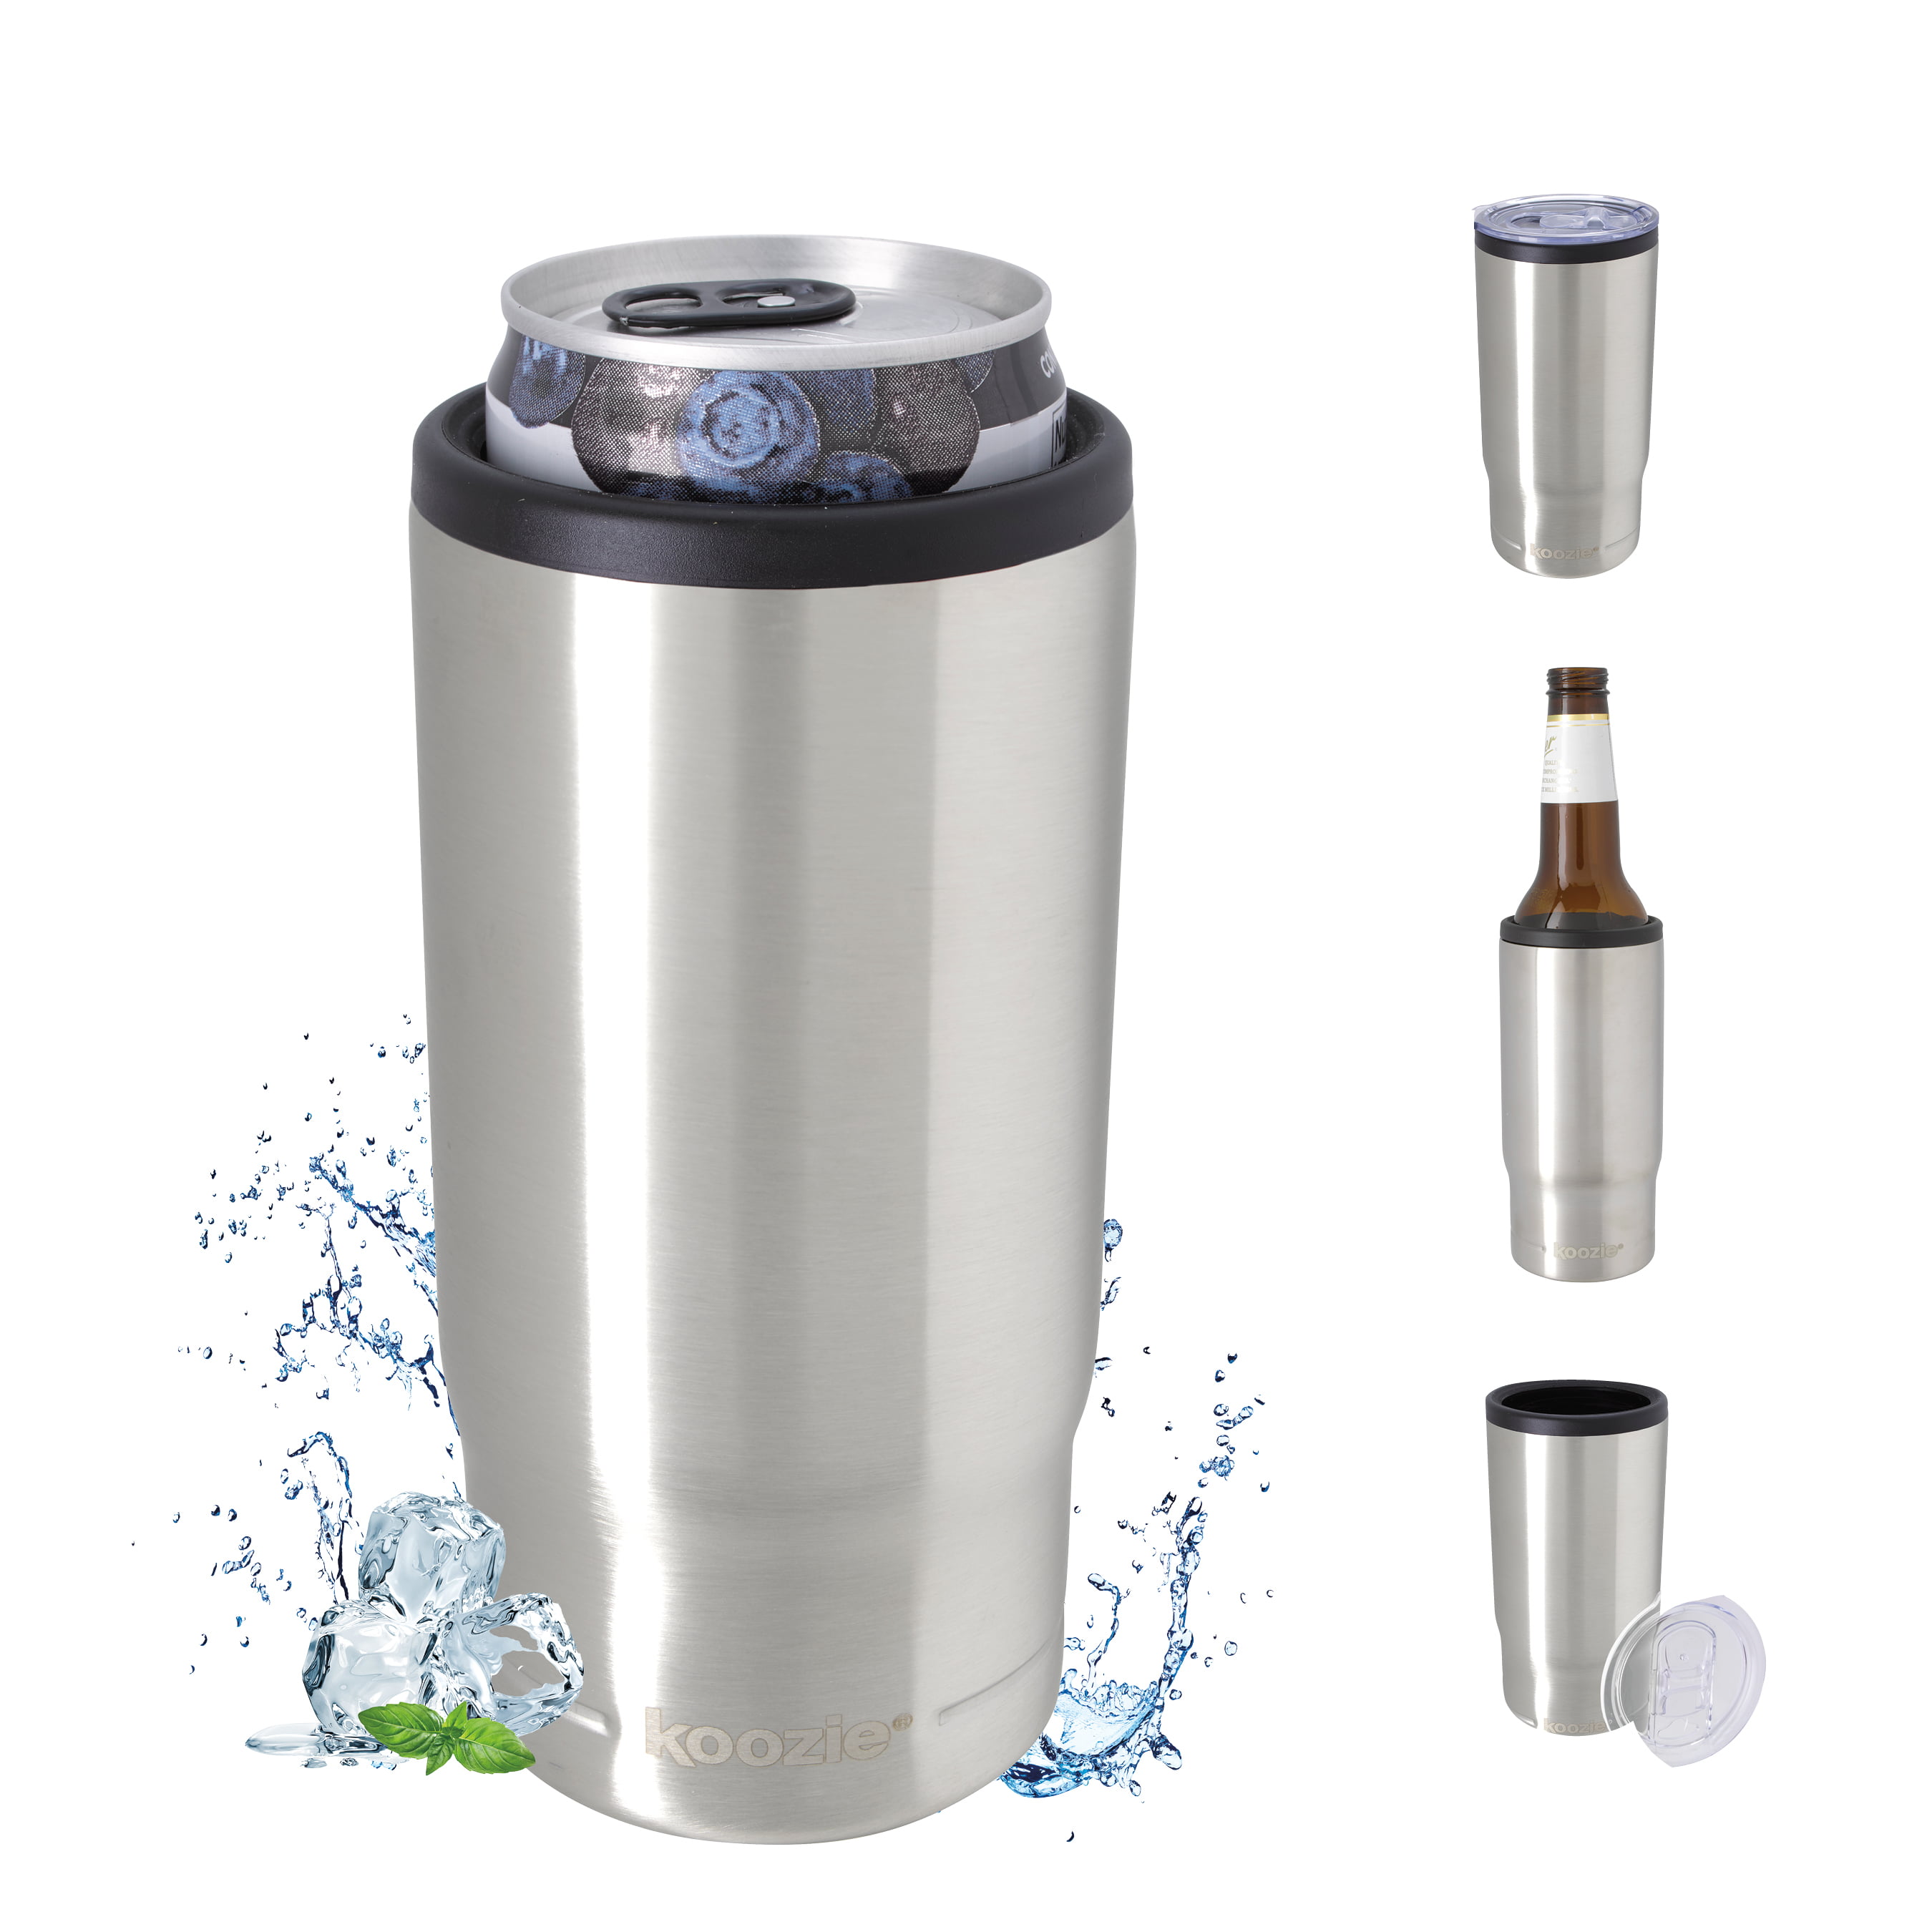 KOOZIE® Stainless Steel Triple 3-in-1 Can Cooler, Bottle or Tumbler with  Lid for 16 oz Tall Boy Cans, Double Wall Vacuum Insulated for Hot and Cold